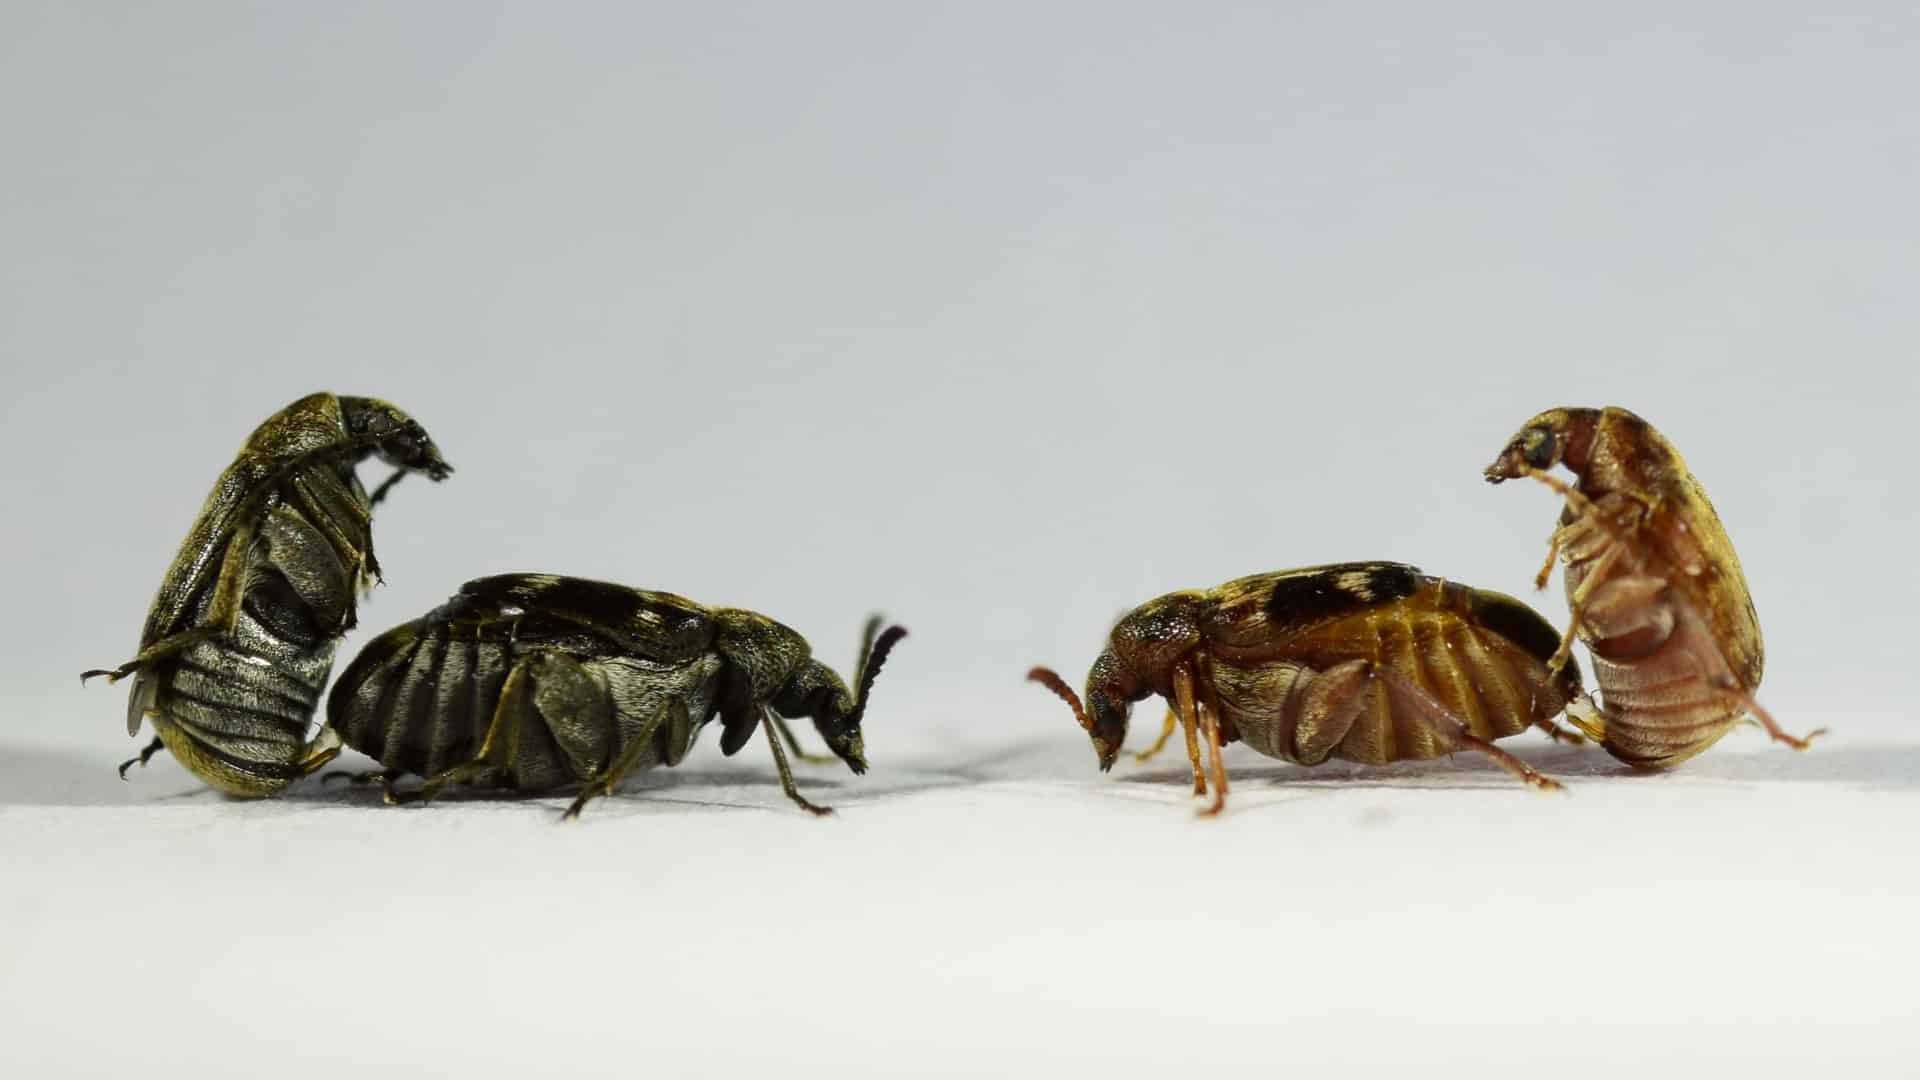 Two mating couples of Callosobruchus maculatus seed beetles deriving from an inbred black strain (left) or a wildtype strain (right). The males (outer-left and outer-right) have inserted their genitalia into the female. The mating may last several minutes, during which the male transfers ca. 50,000 sperm in an ejaculate that weighs approximately 6% of his own body weight. In the study, sperm from the two types of males competed for fertilization of females’ eggs, and paternity of the fathers (and hence, how successful they were in sperm competition) could be assigned based on the color morph of the offspring.